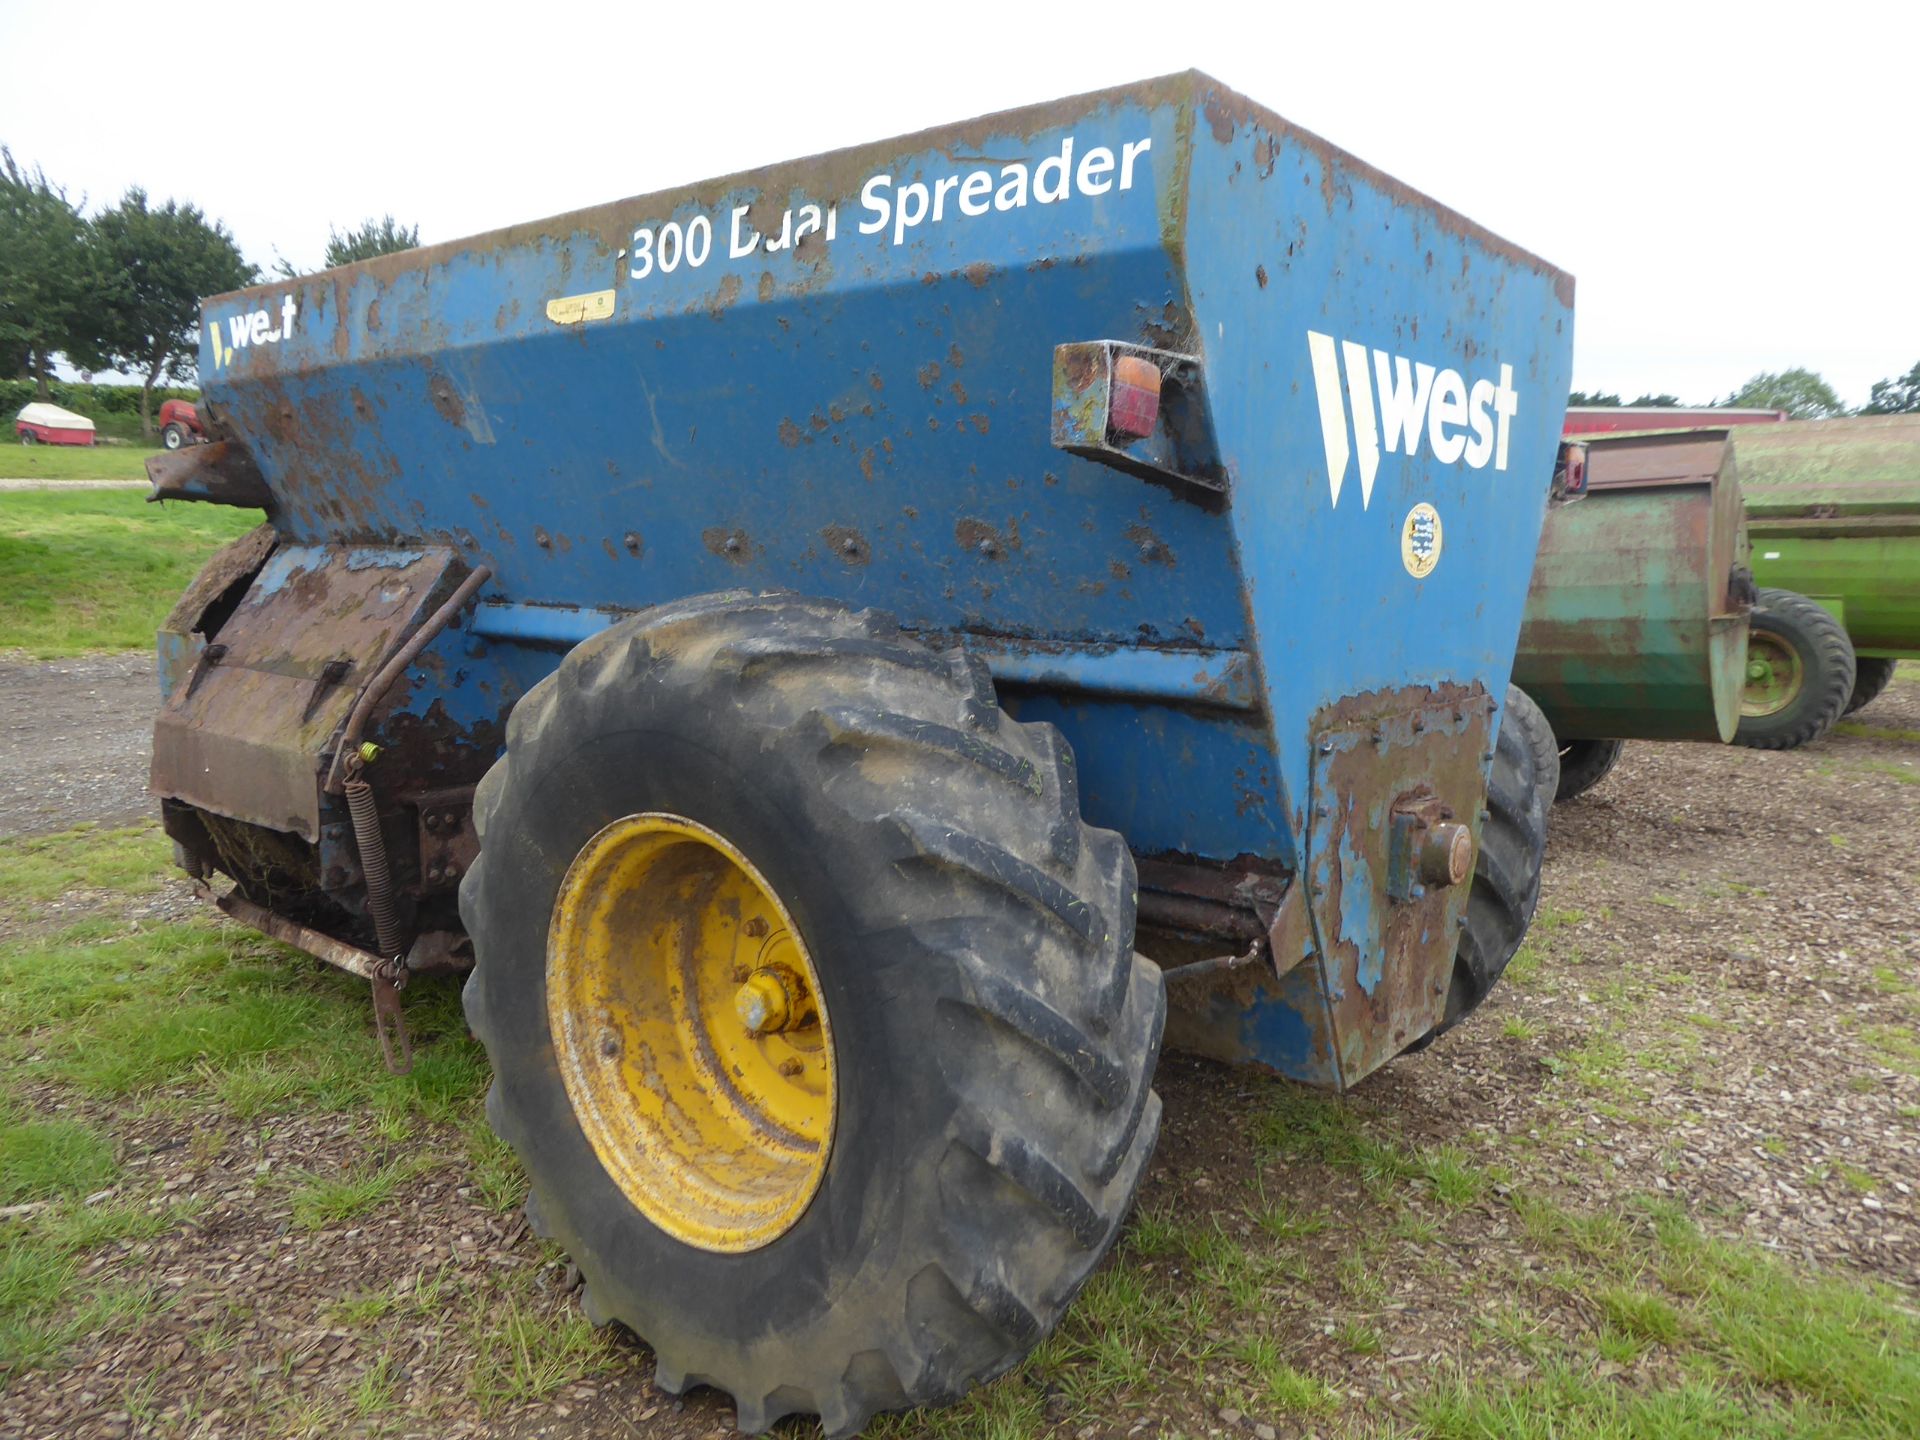 West dual spreader - Image 2 of 2